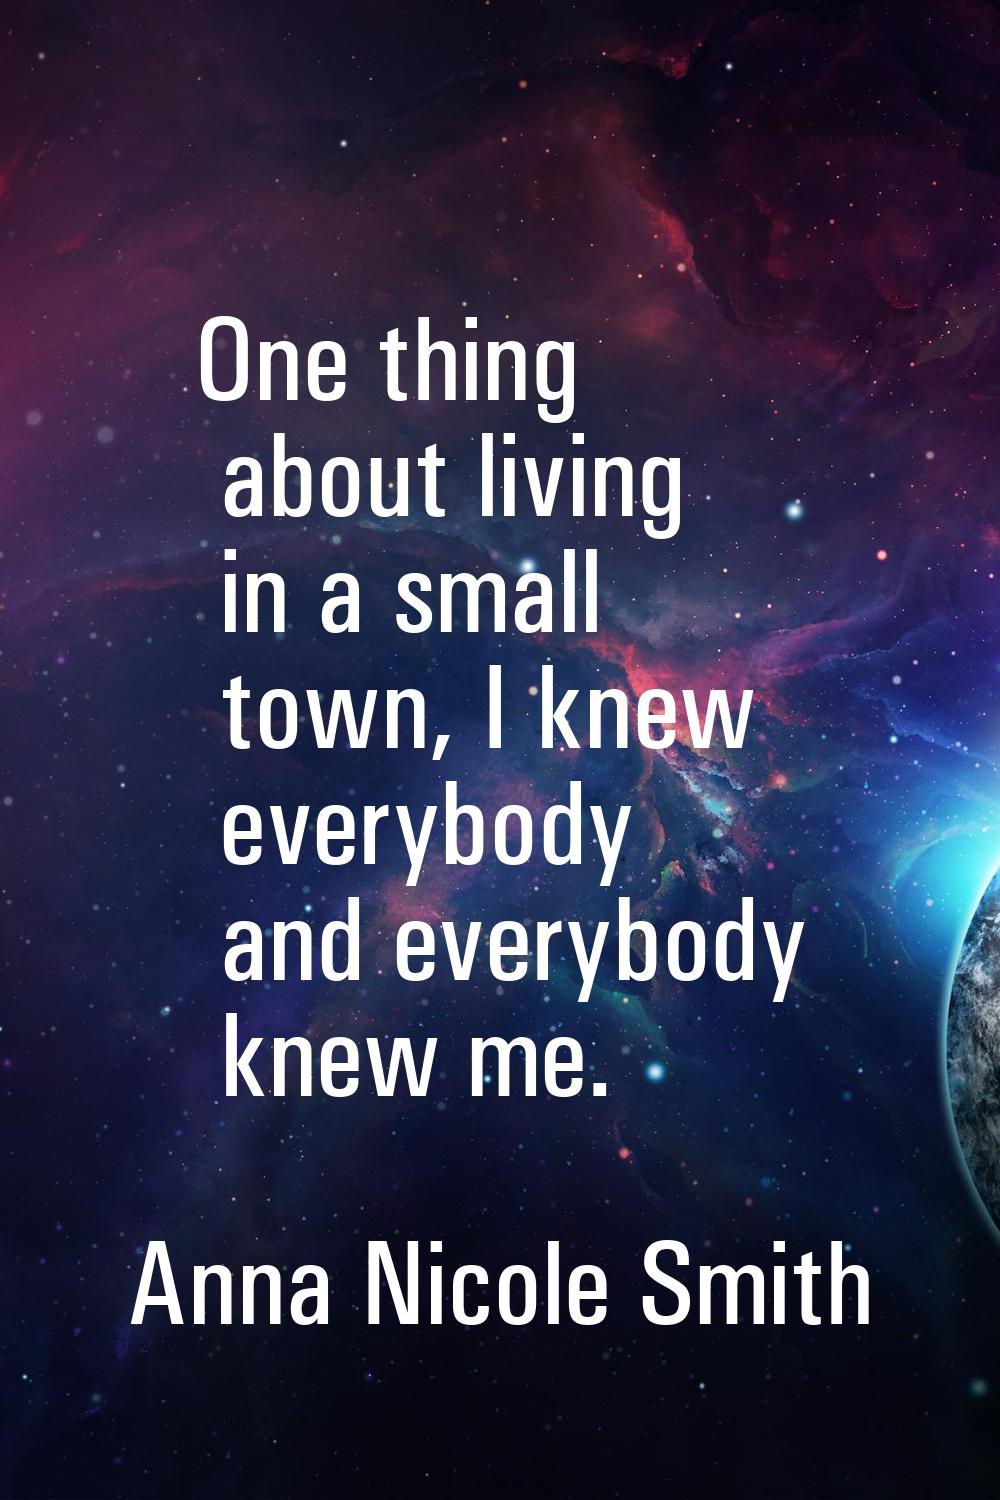 One thing about living in a small town, I knew everybody and everybody knew me.